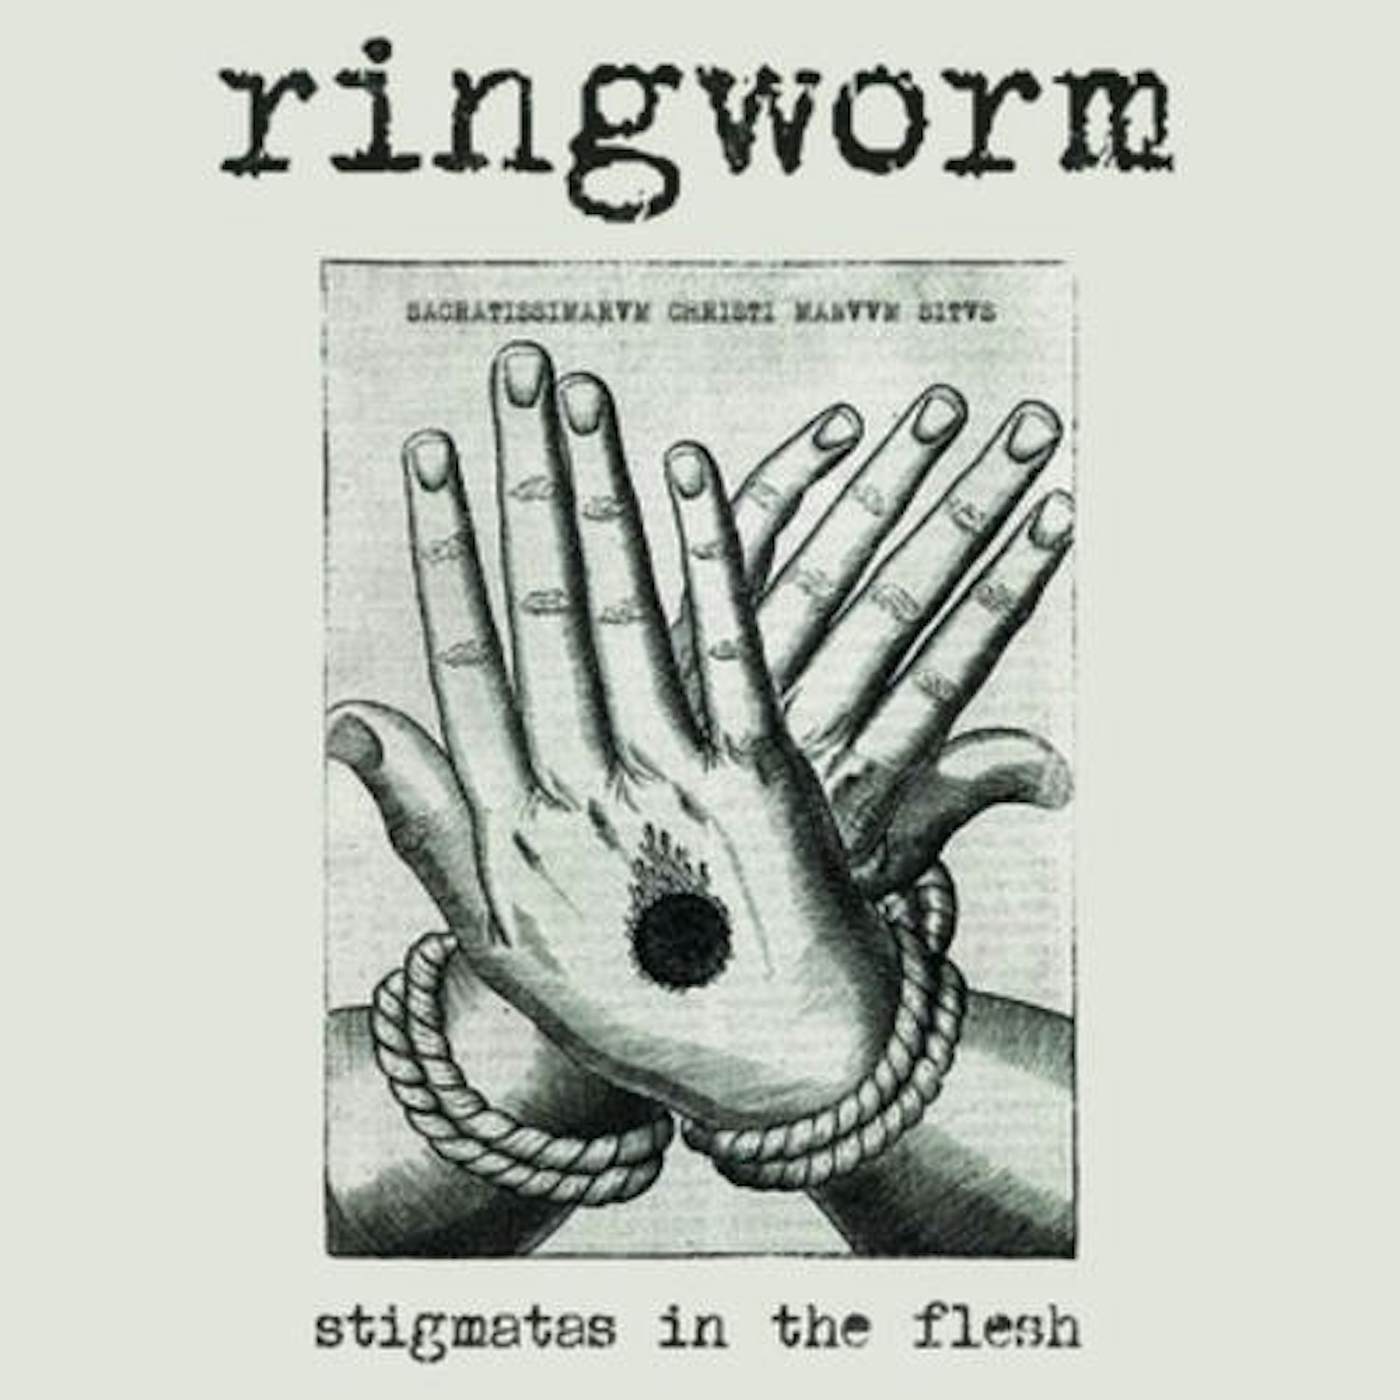 Ringworm STIGMATAS IN THE FLESH Vinyl Record - MP3 Download Included, Limited Edition